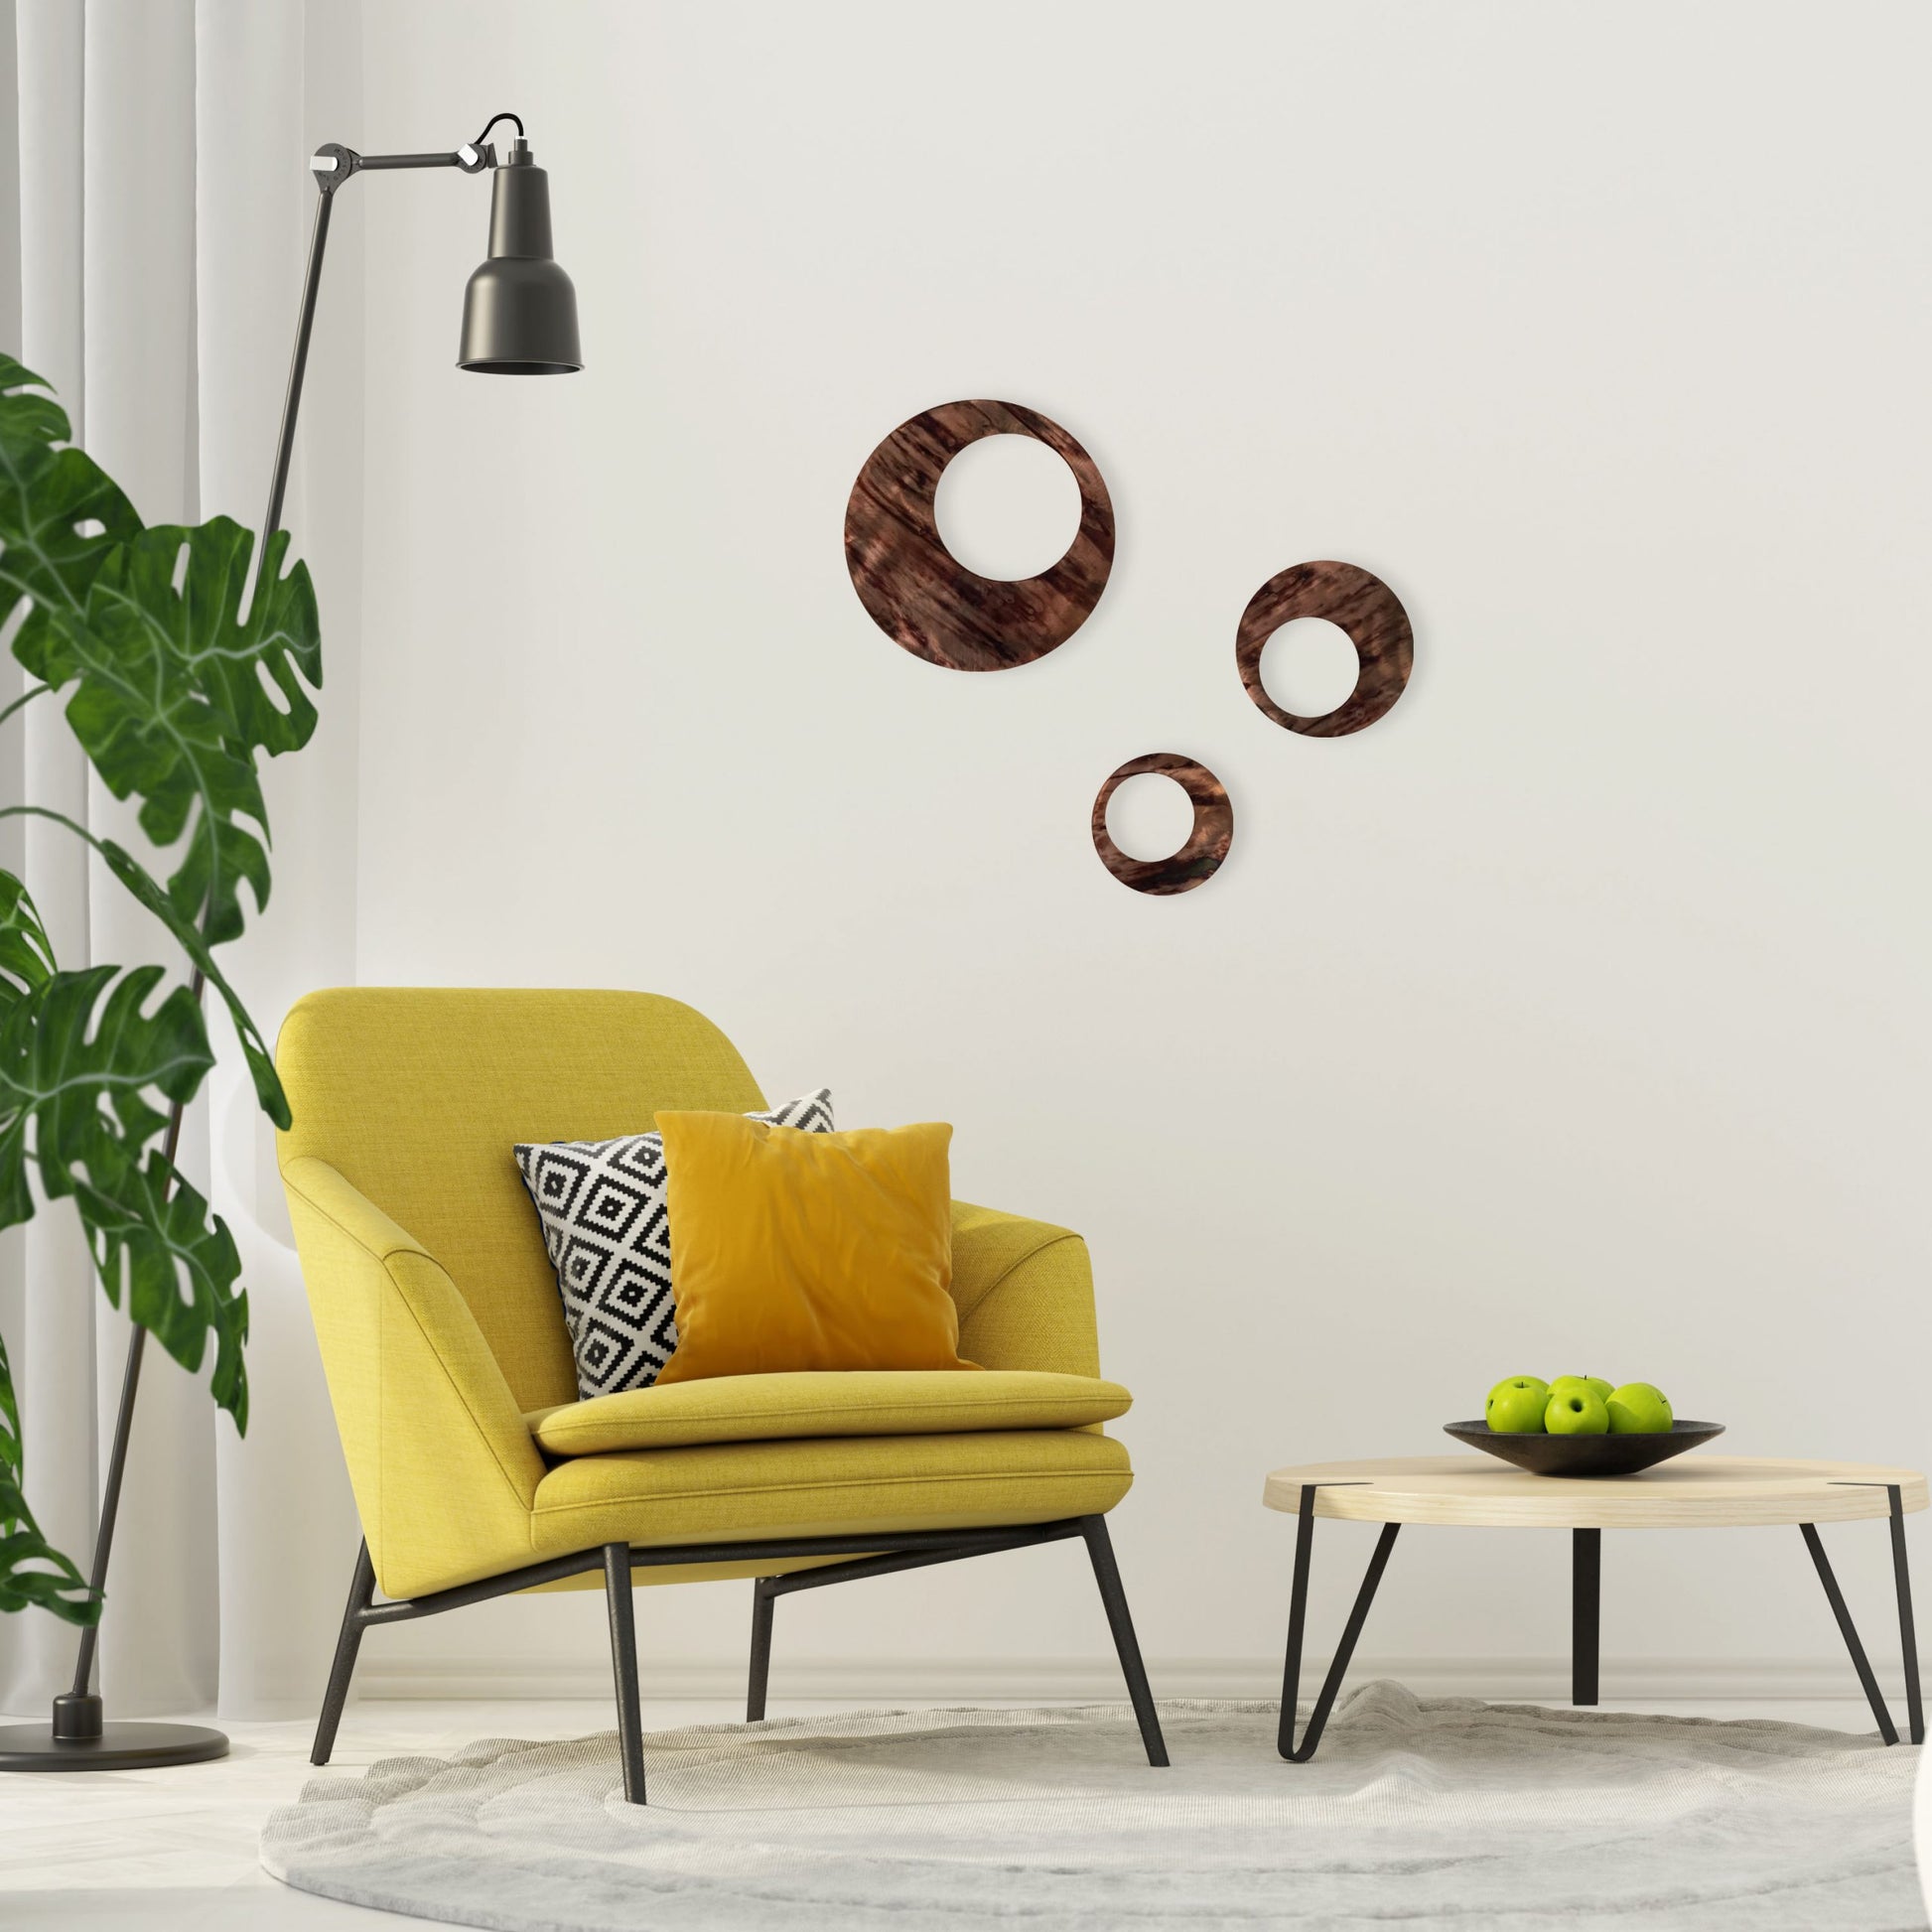 DC-Contemporary-Circles-over-chair-scaled